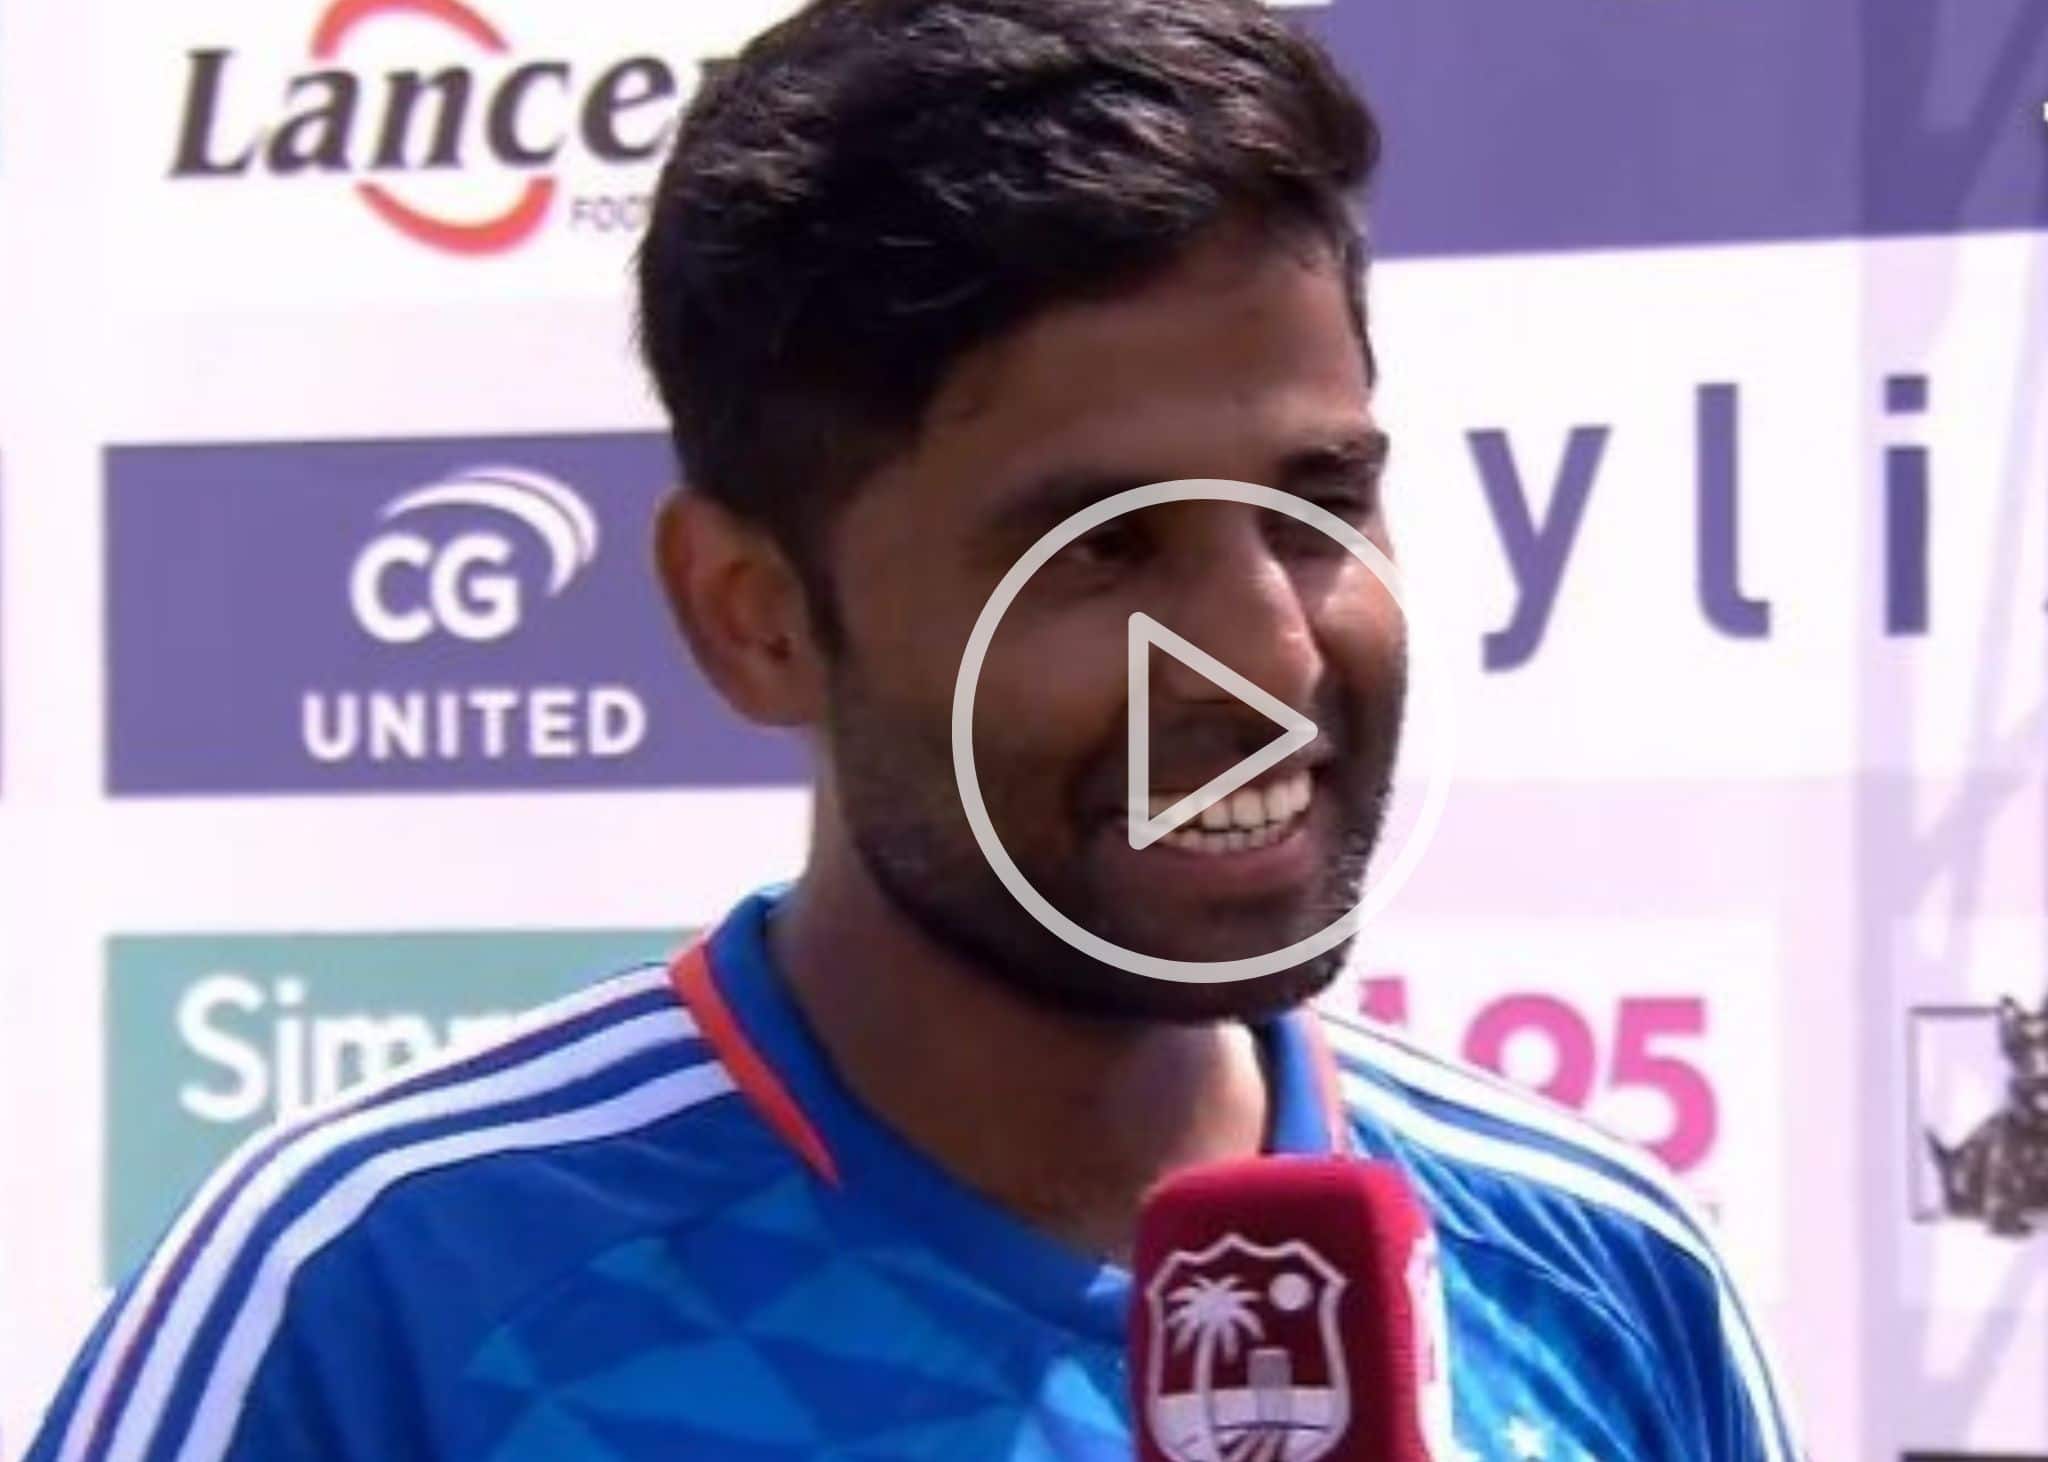 [Watch] 'Would Like to Correct You' - Suryakumar Yadav Gives Hilarious Reply To Journalist After 3rd T20I vs WI